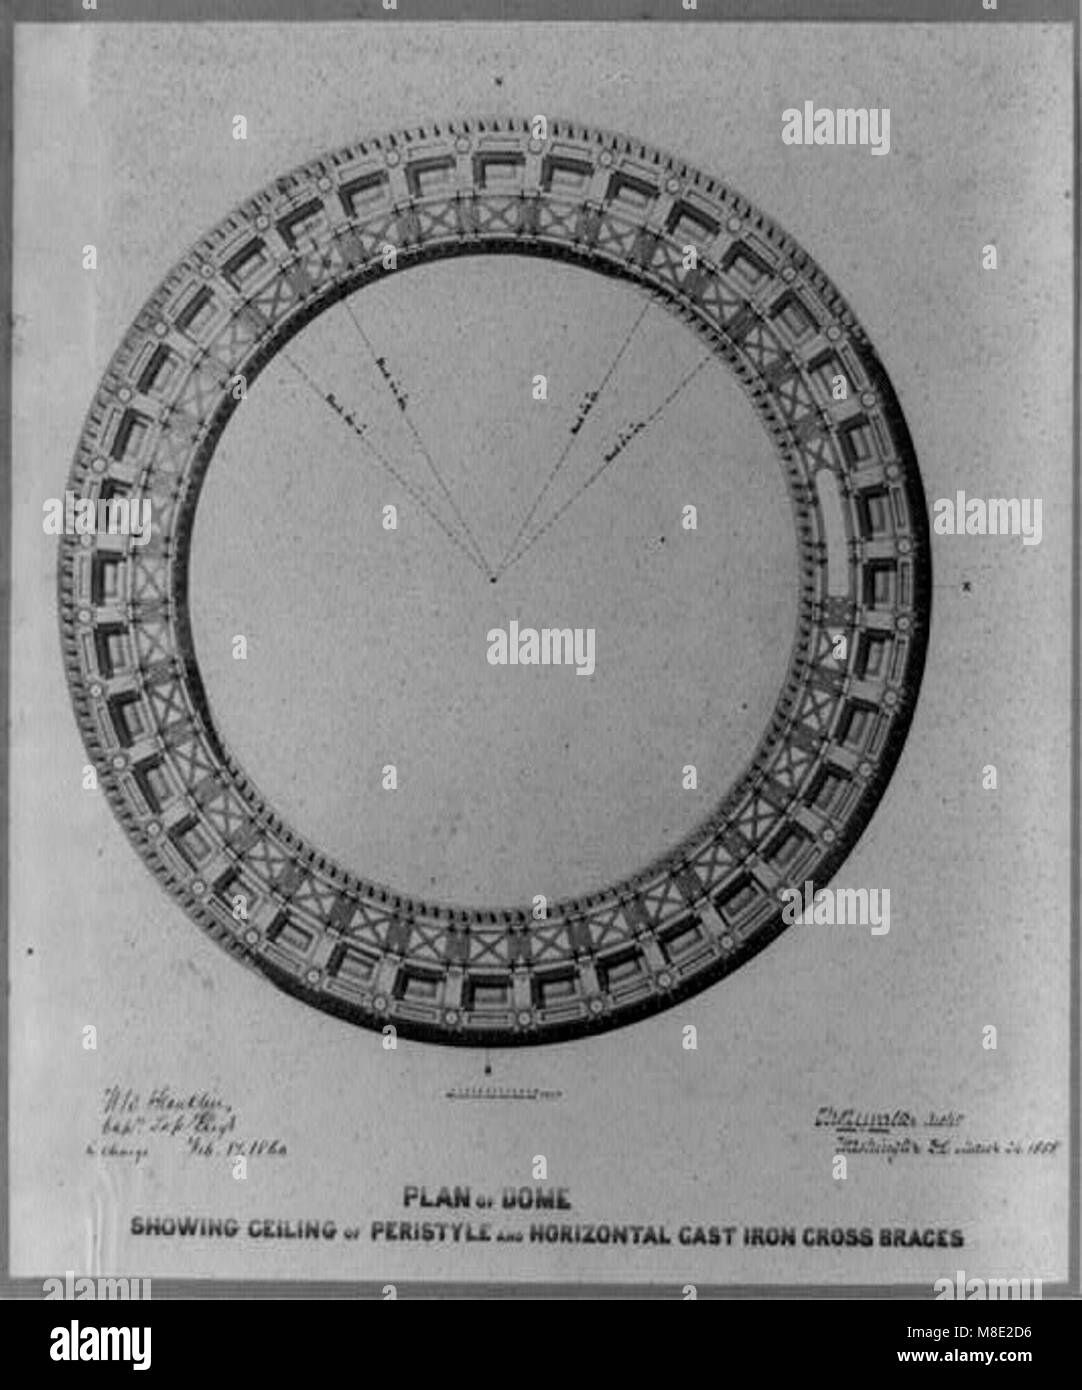 Plan of dome showing ceiling of peristyle and horizontal cast iron cross braces LCCN2002718296 Stock Photo